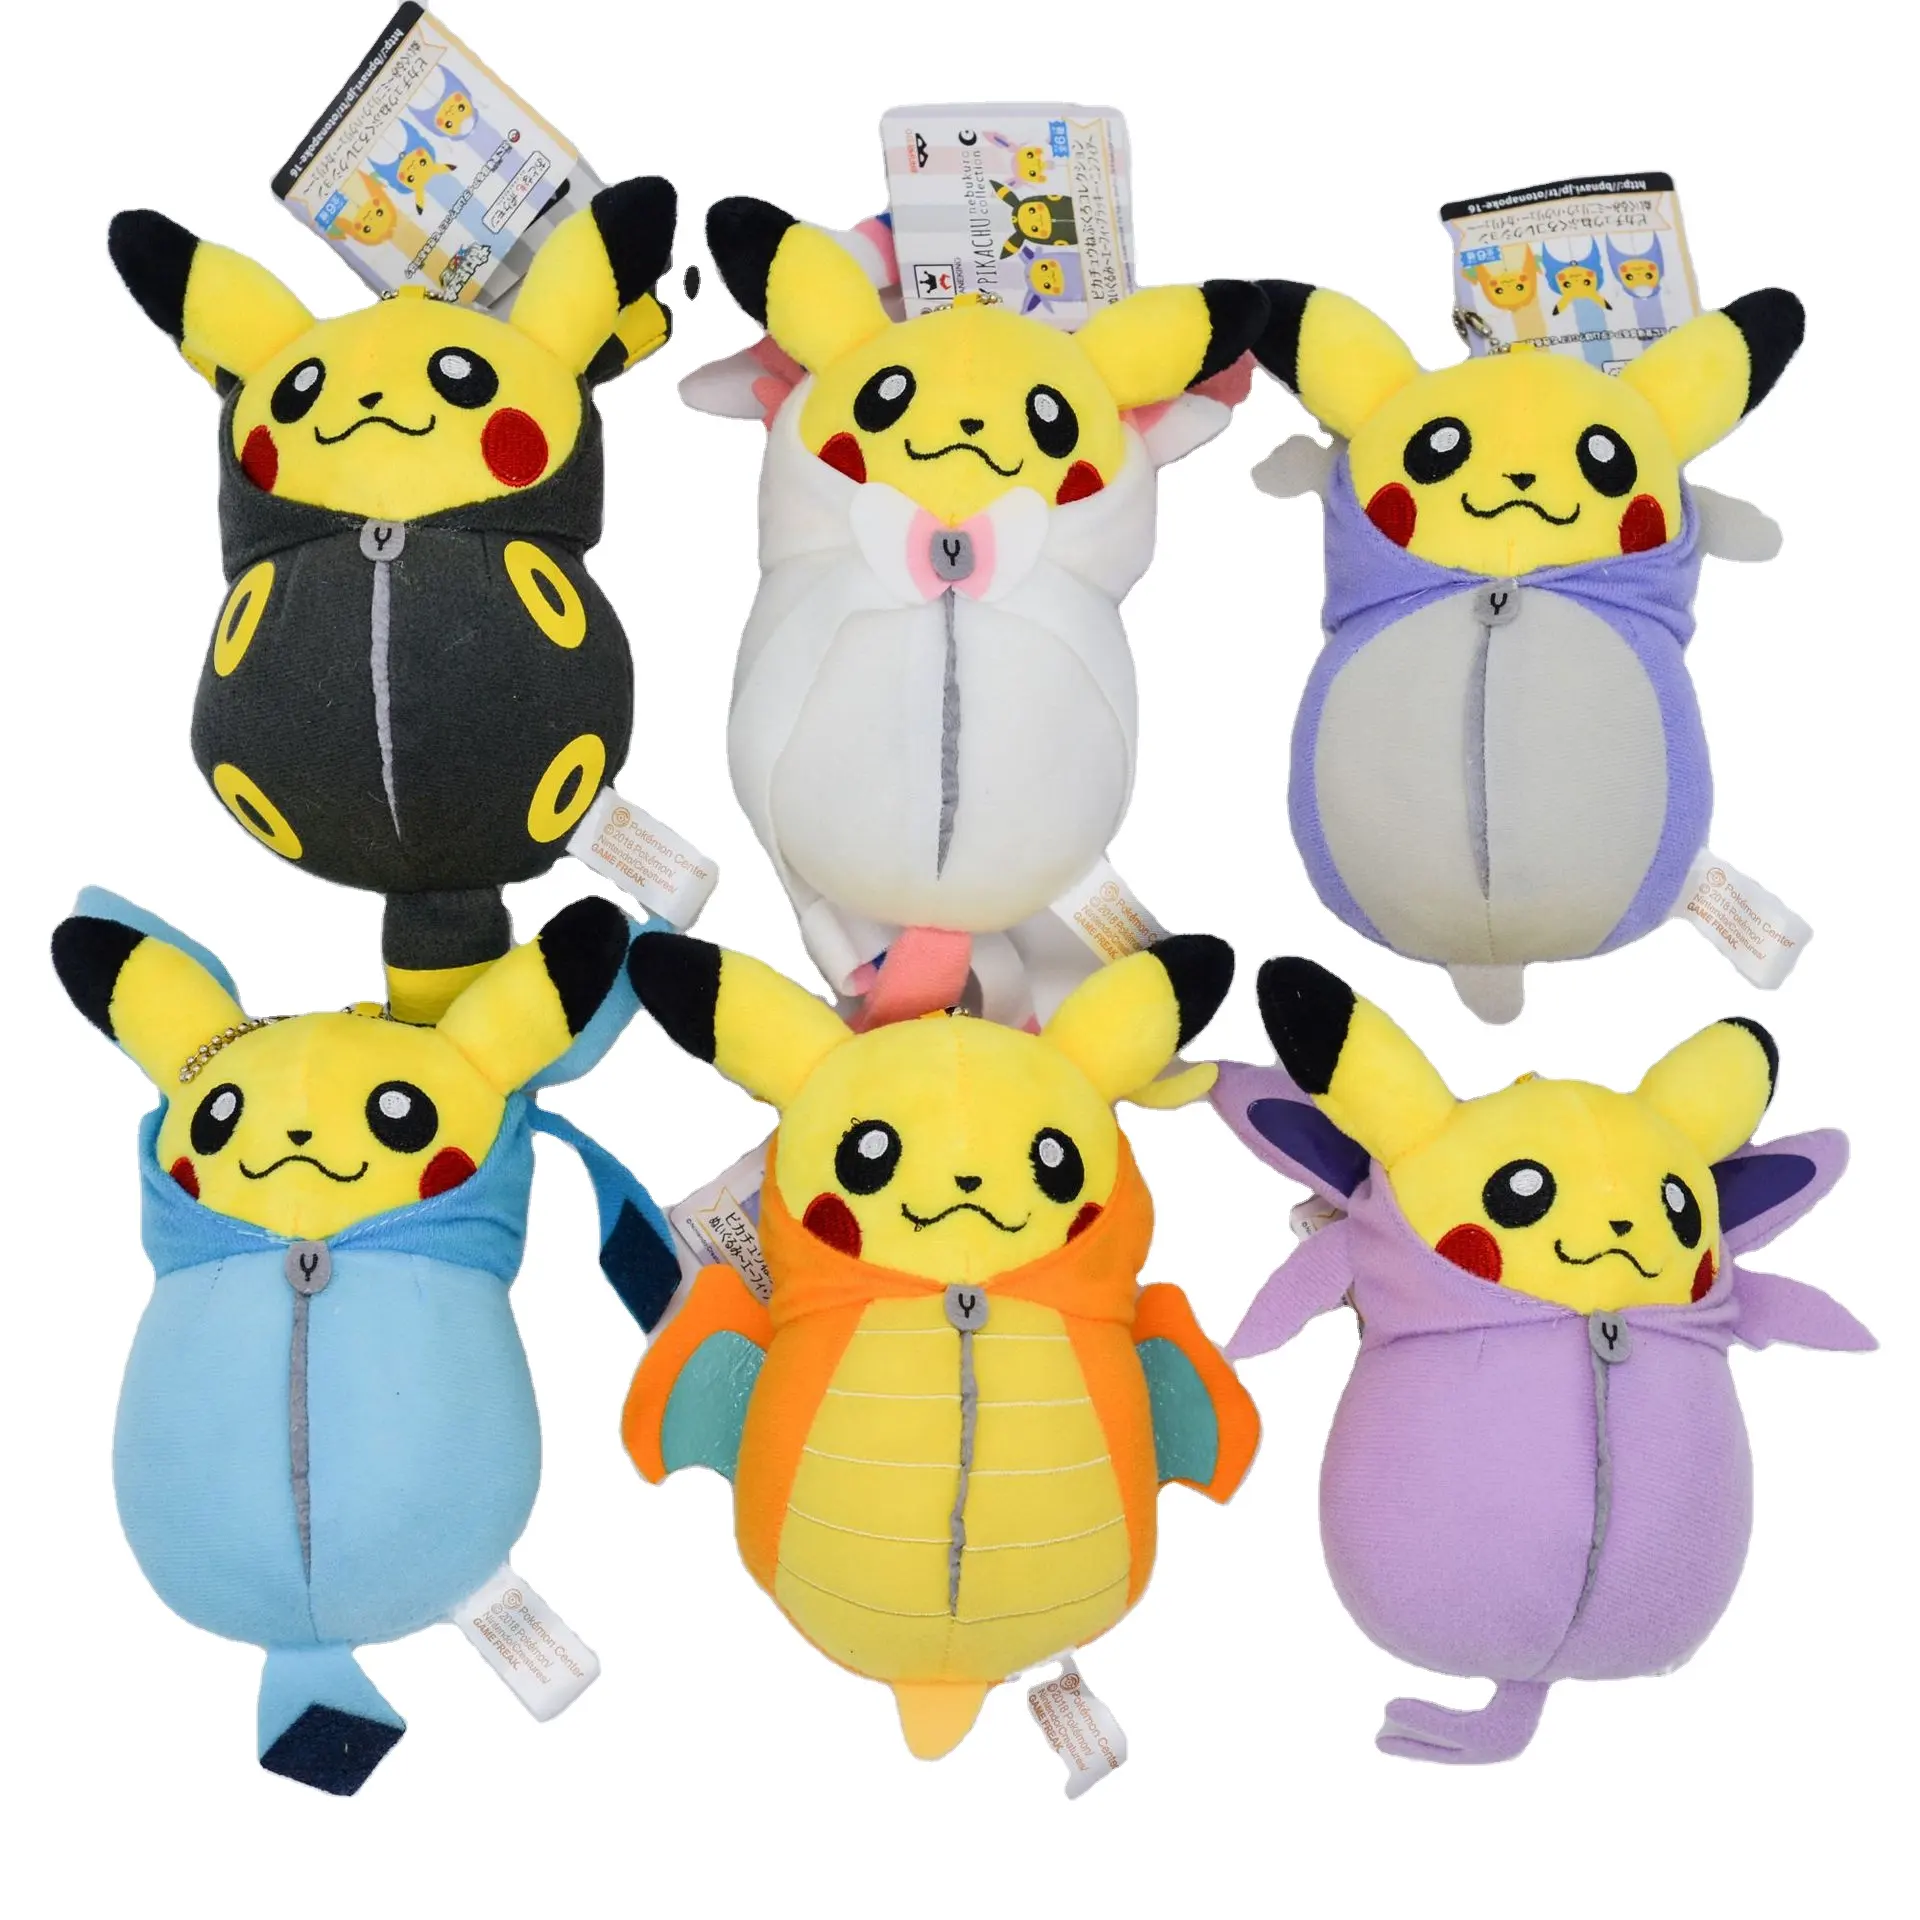 Hot Sale 15CM Kawaii sleeping bag plush toy Cute Animals pendant keychain Decorative backpack for boys and girls as a gift